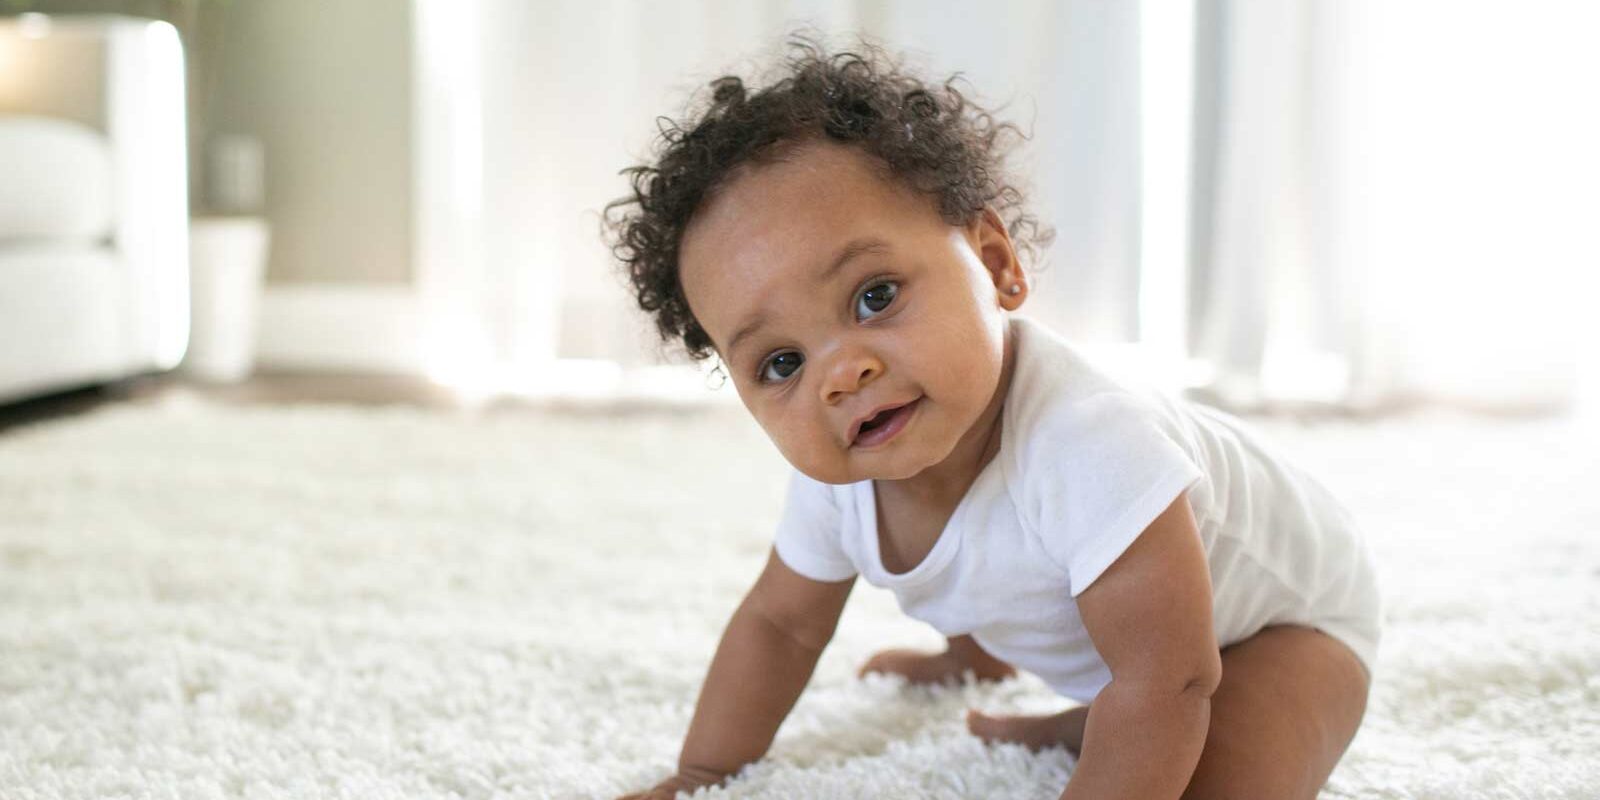 Baby crawling on carpeted floor